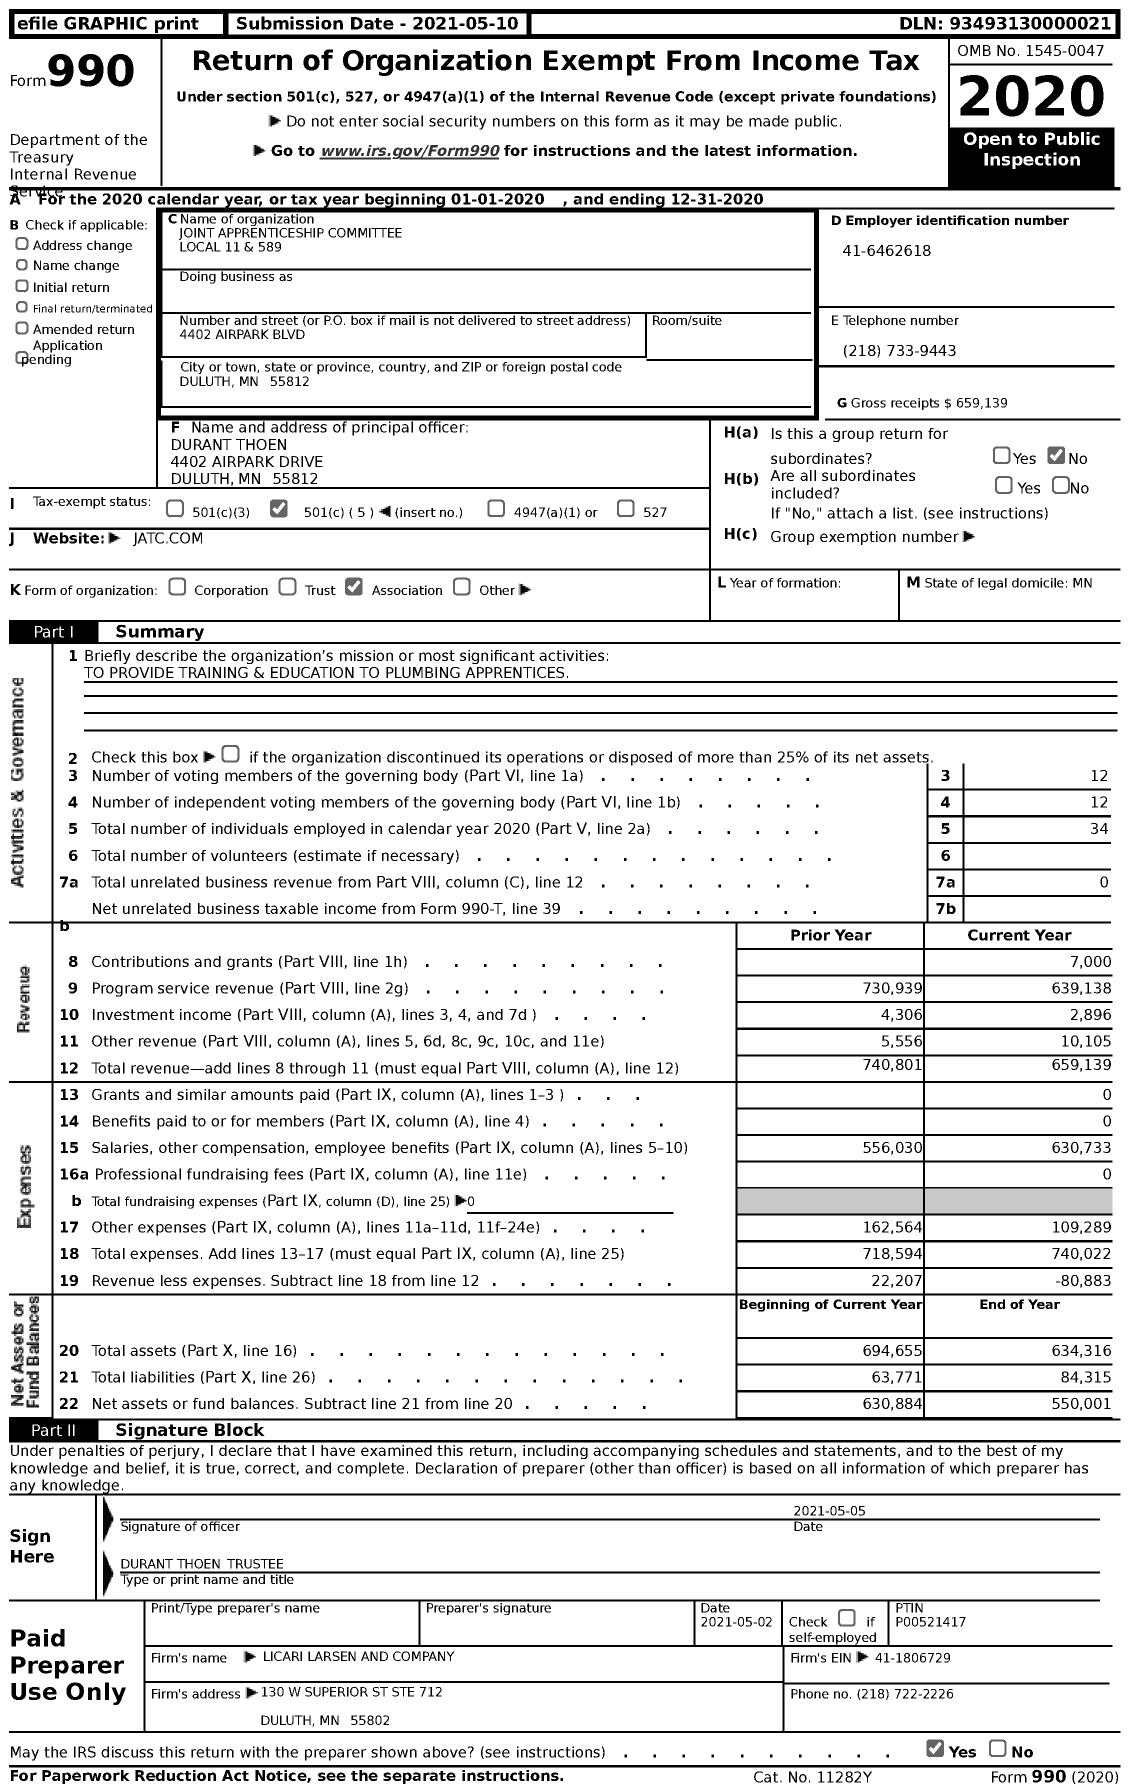 Image of first page of 2020 Form 990 for Joint Apprenticeship Committee Local 11 and 589